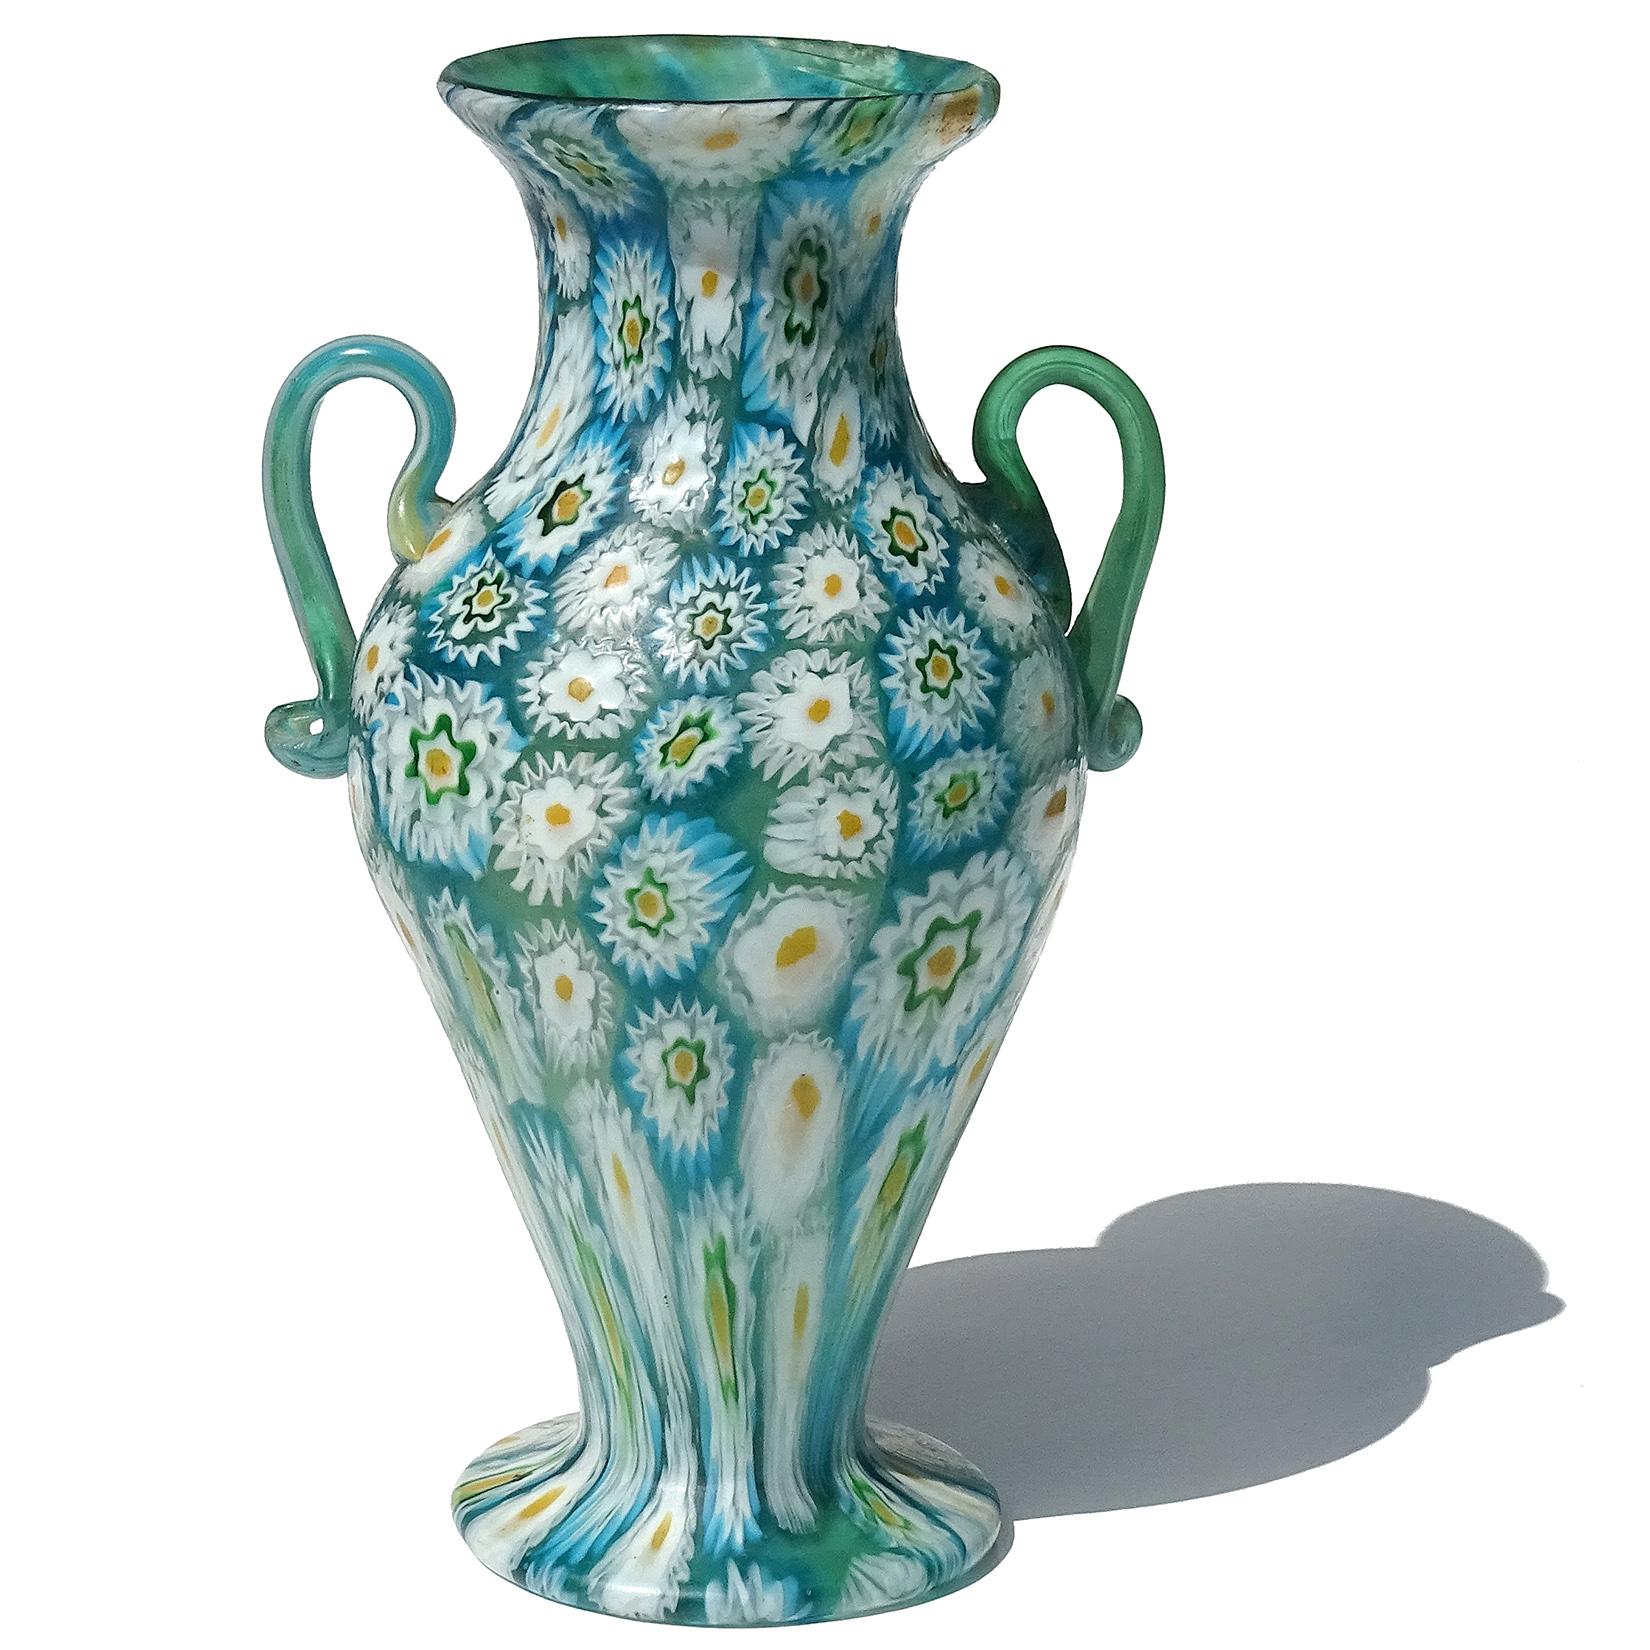 Beautiful antique Murano hand blown millefiori flower mosaic Italian art glass decorative double handles vase. Documented to the Fratelli Toso company, circa 1910-1930. Created in a classical shape with an alternating pattern of vertical rows in 2